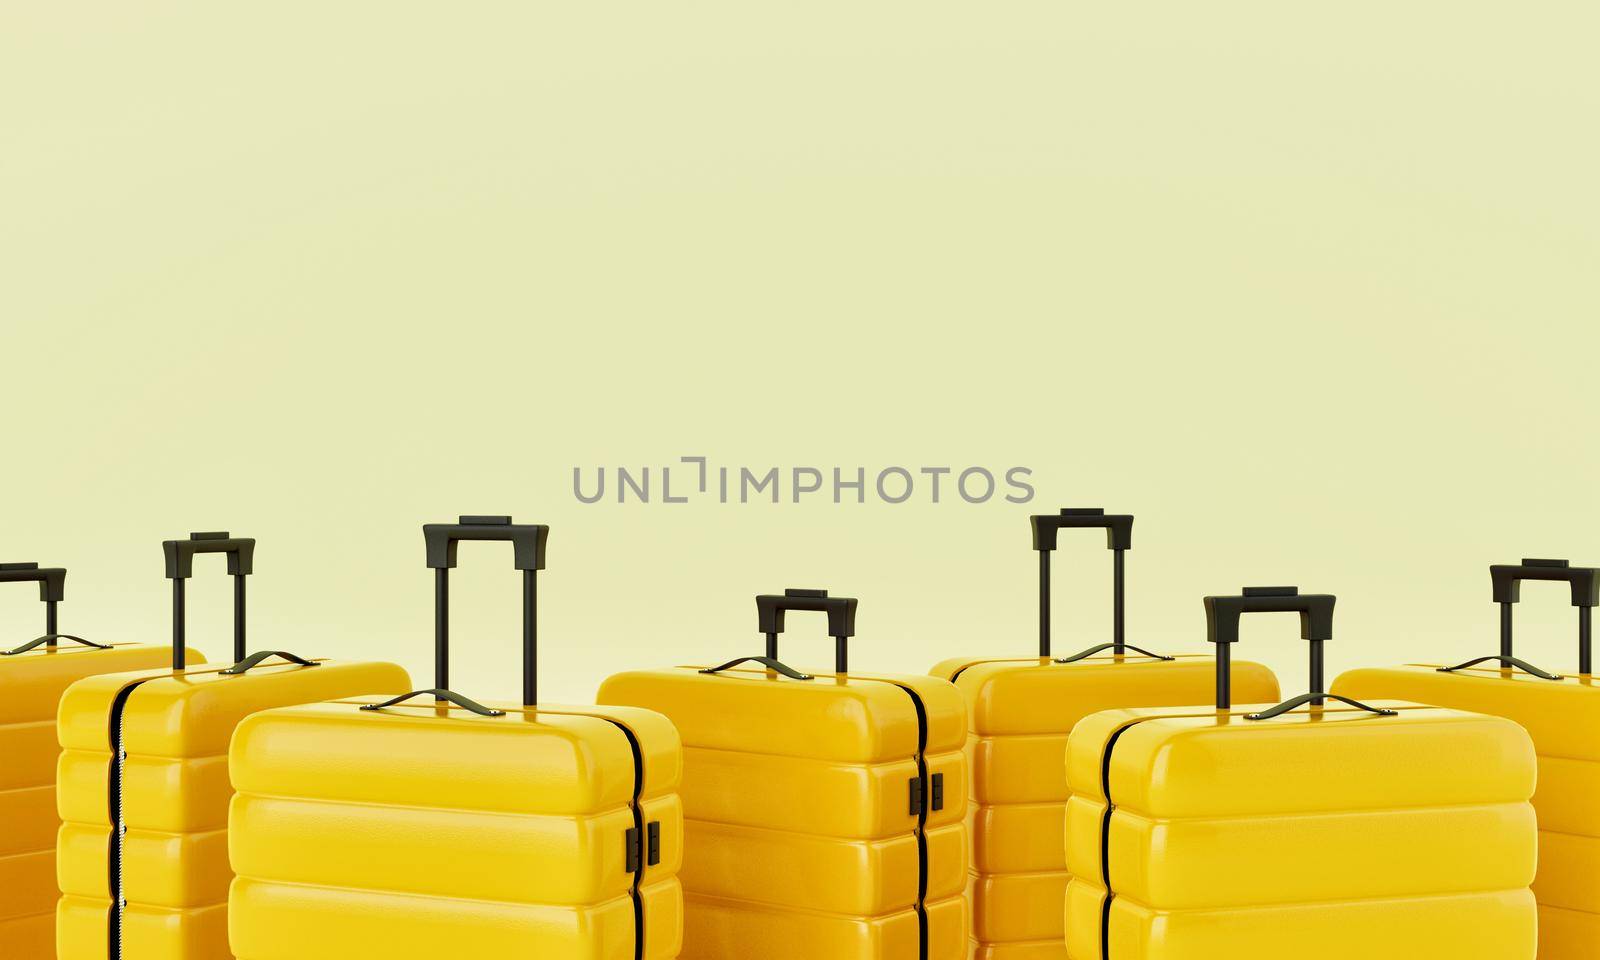 Group of yellow trolley suitcases on isolated background. Travel object and wanderlust concept. 3D illustration rendering by MiniStocker